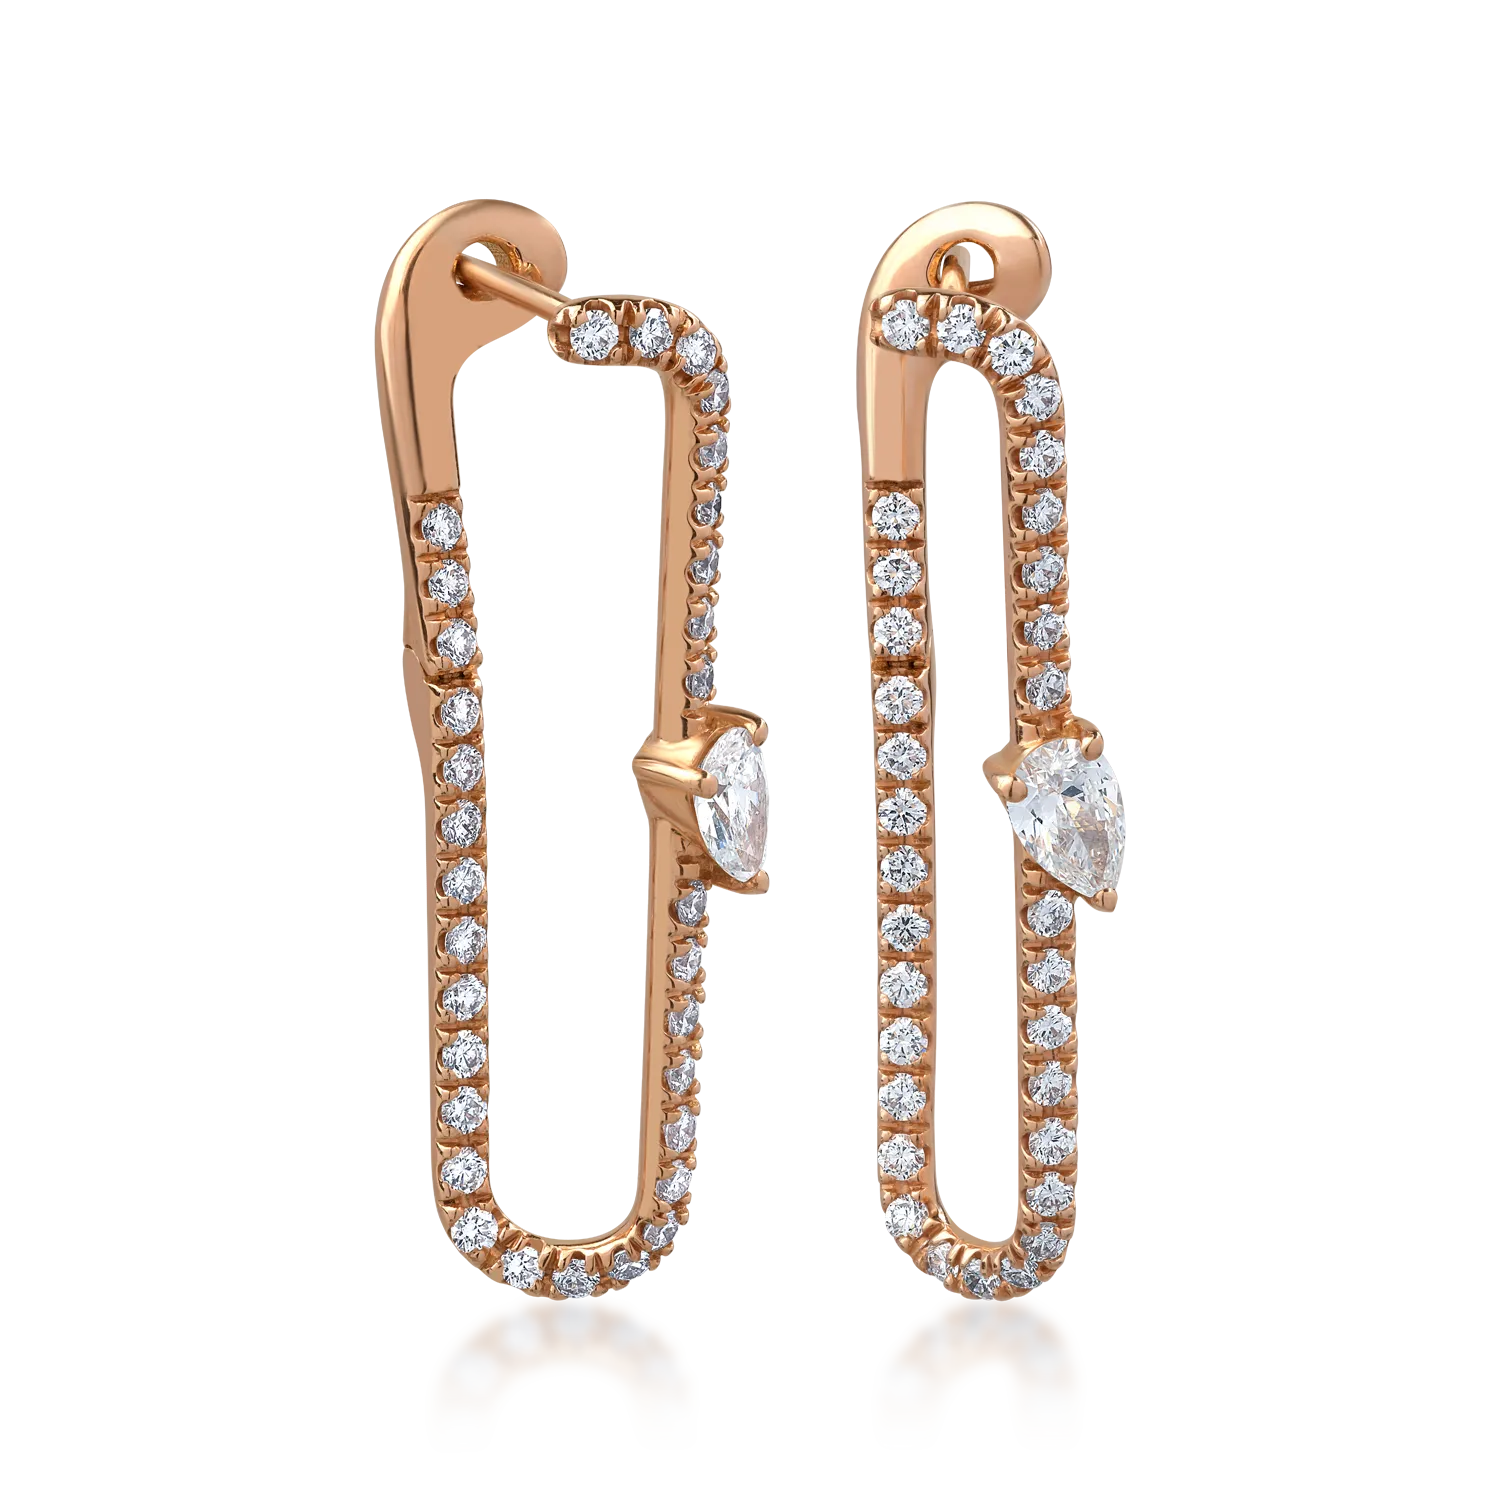 18K rose gold earrings with 1.55ct diamonds